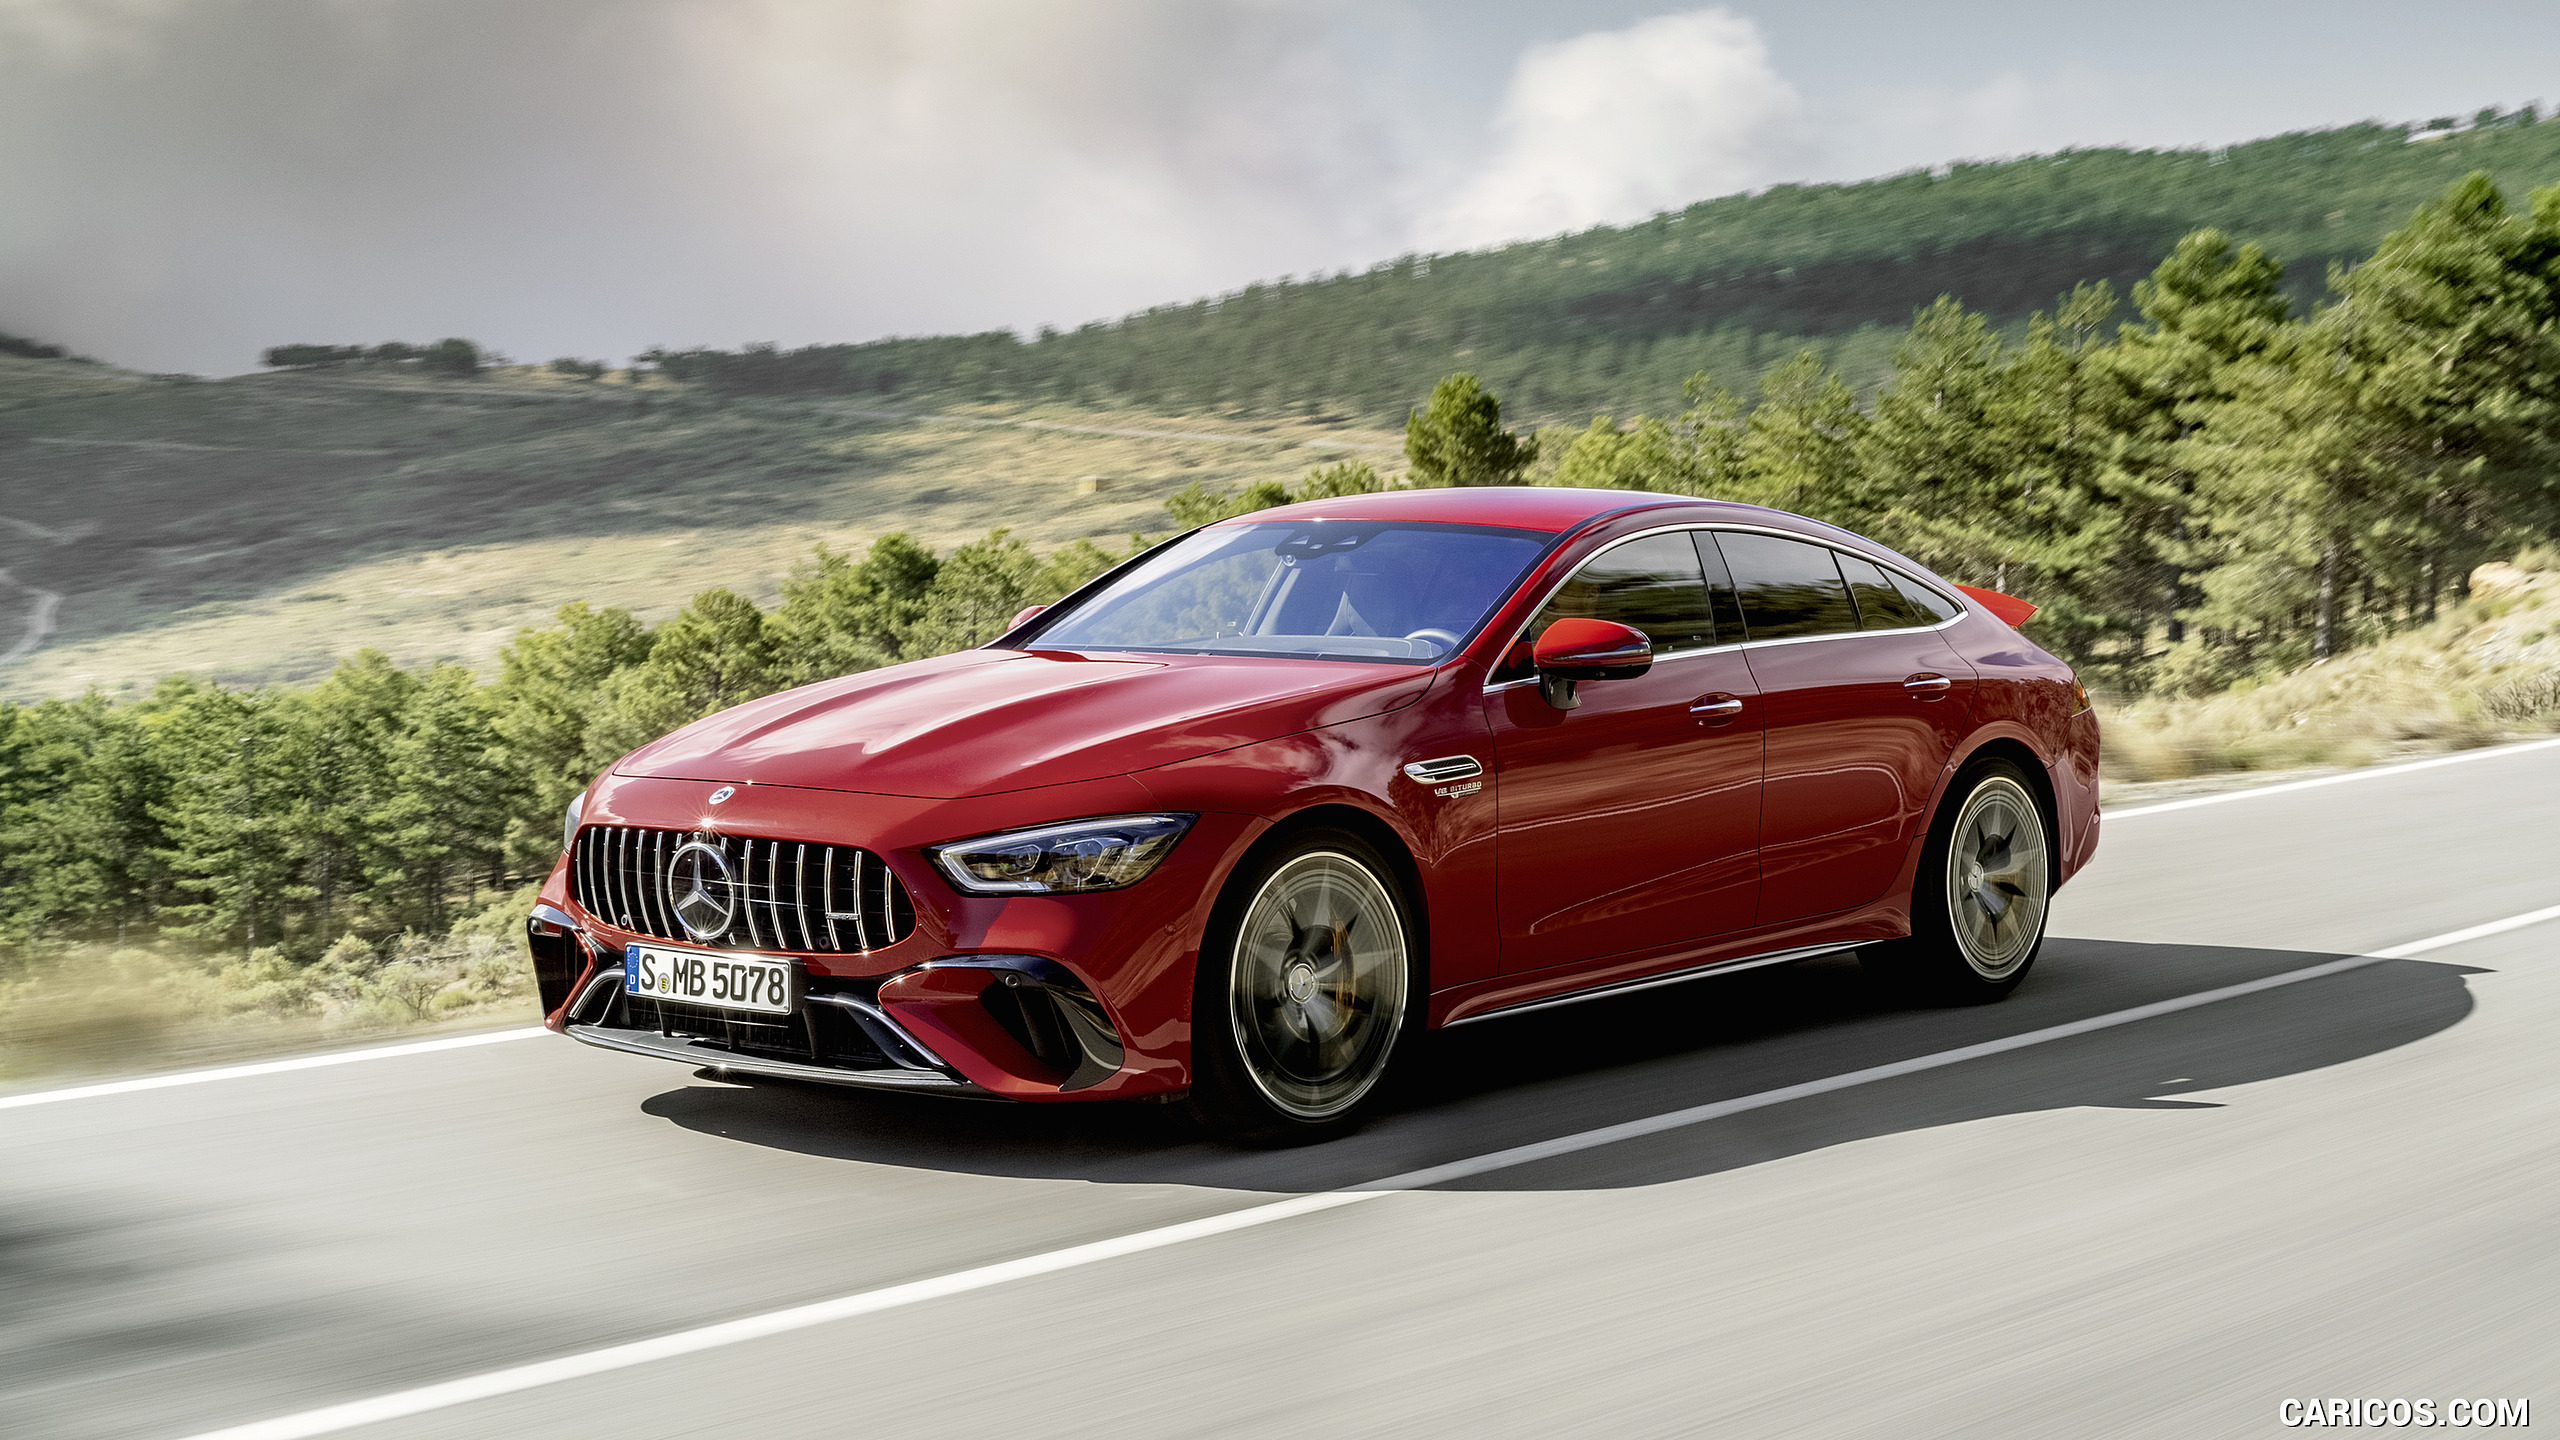 2022 Mercedes-AMG GT 63 S E Performance 4MATIC+ (Color: Jupiter Red) - Front Three-Quarter, #1 of 88